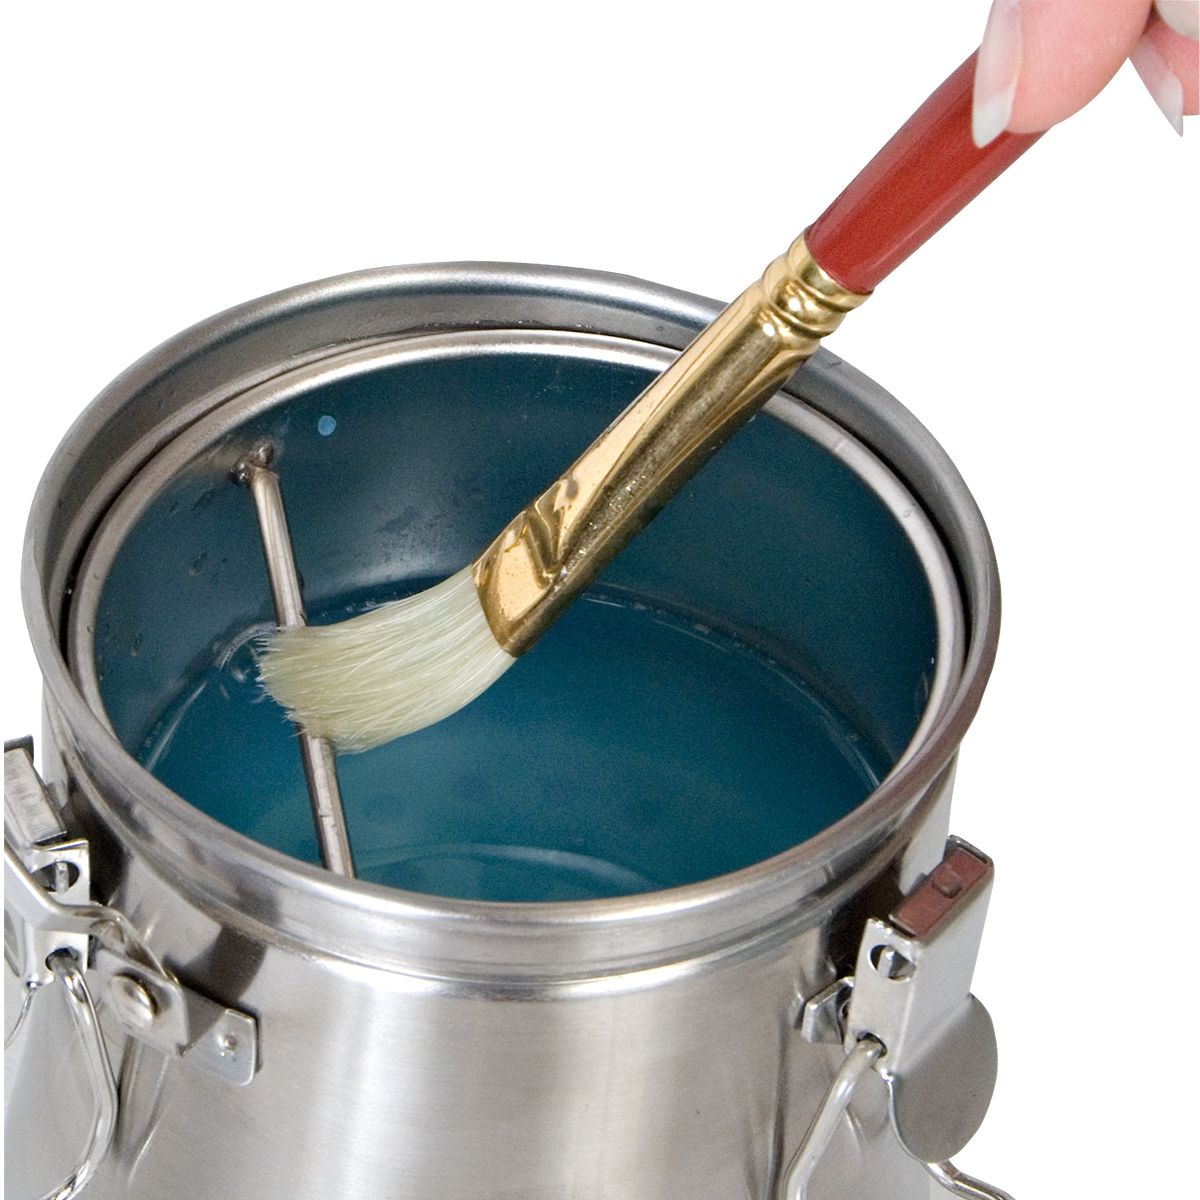 Cleaning chamber that allows paint sediment from your brushes to fall to the bottom